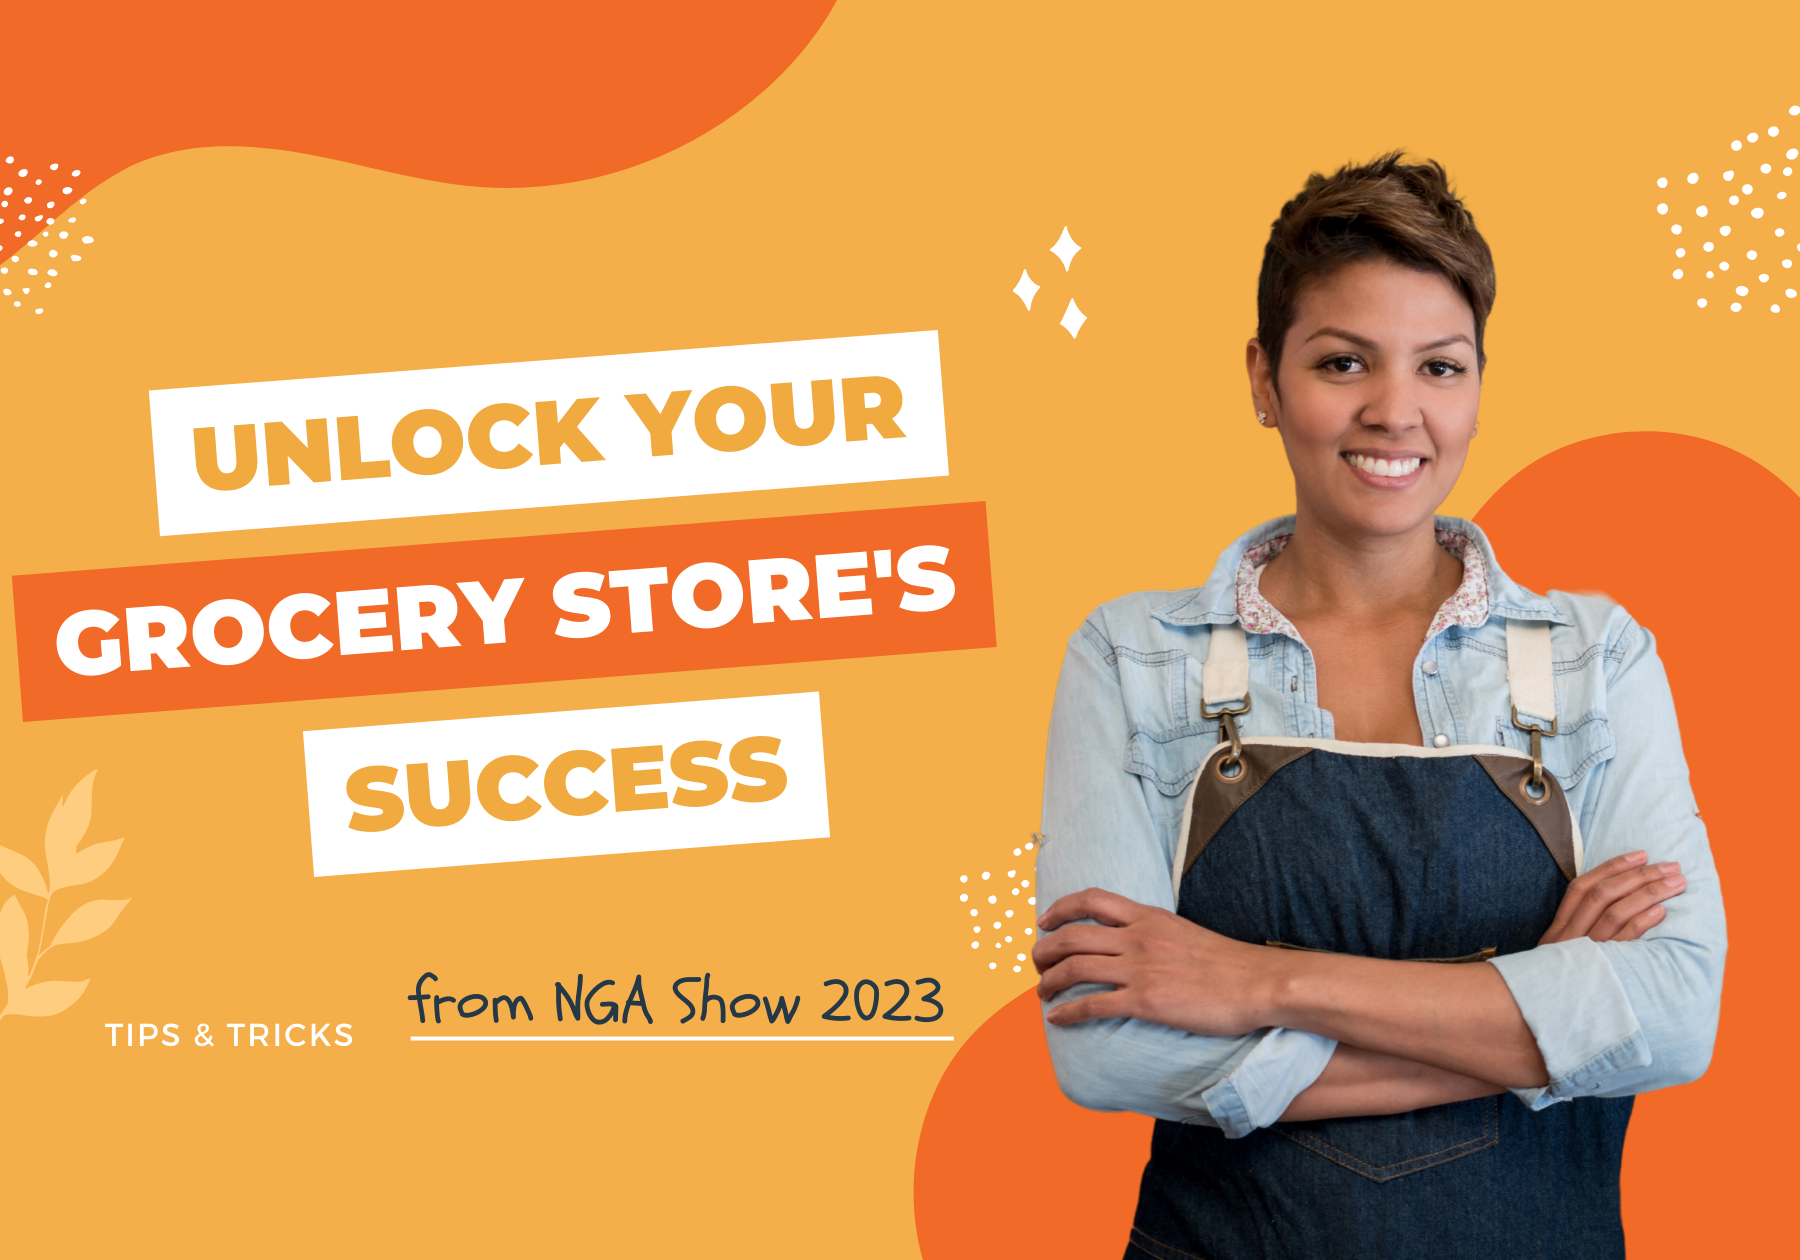 Unlock Your Grocery Store's Success: Tips & Tricks from NGA Show 2023